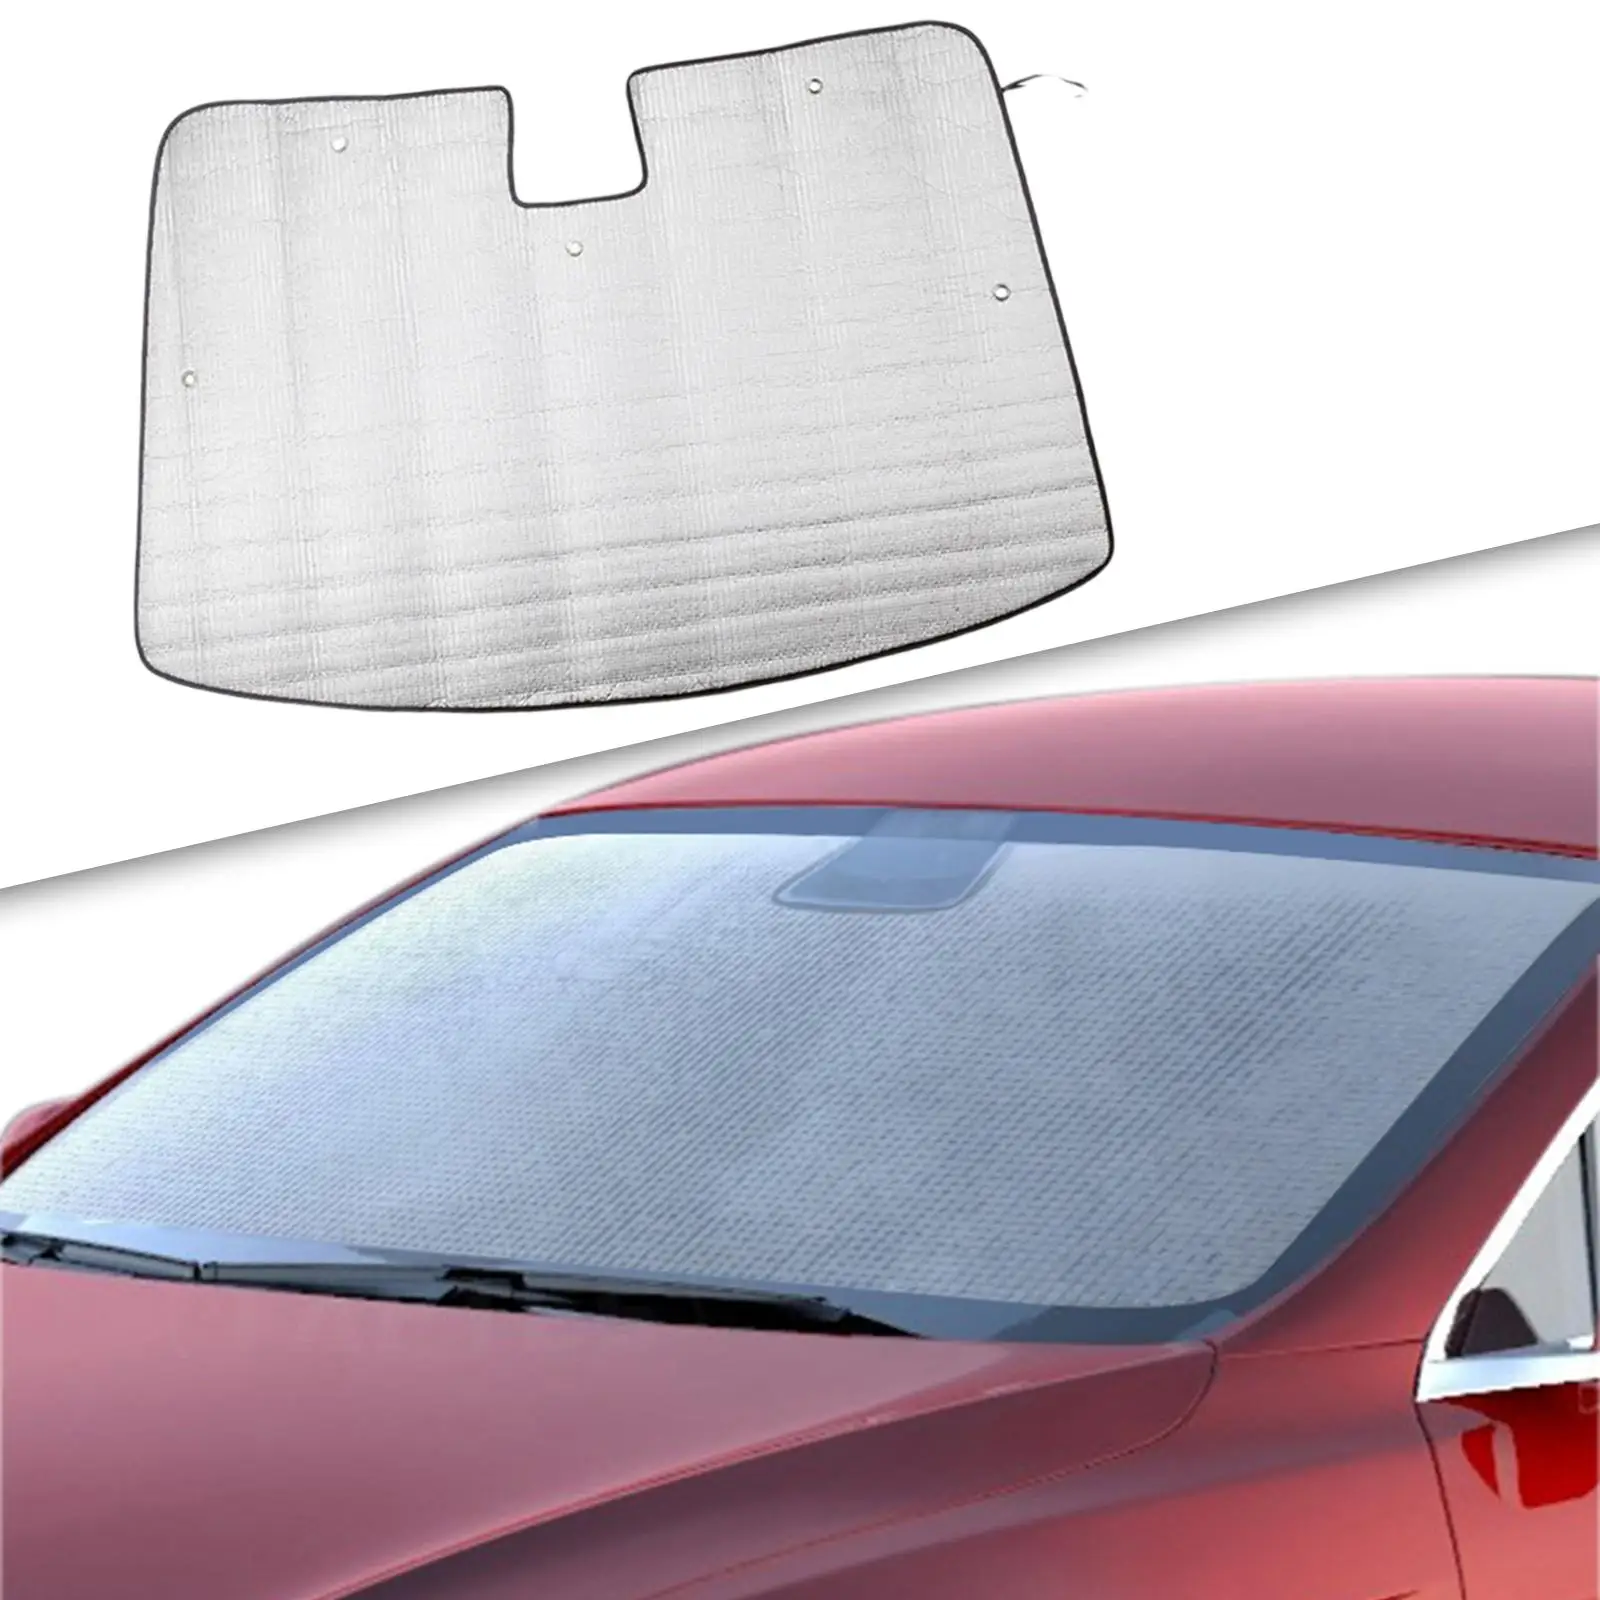 Car Windshield Sunshade Sun Visor Foldable Silver Protection Shield Cover Fit for Tesla Model 3 17-19 Auto Parts Car Supplies